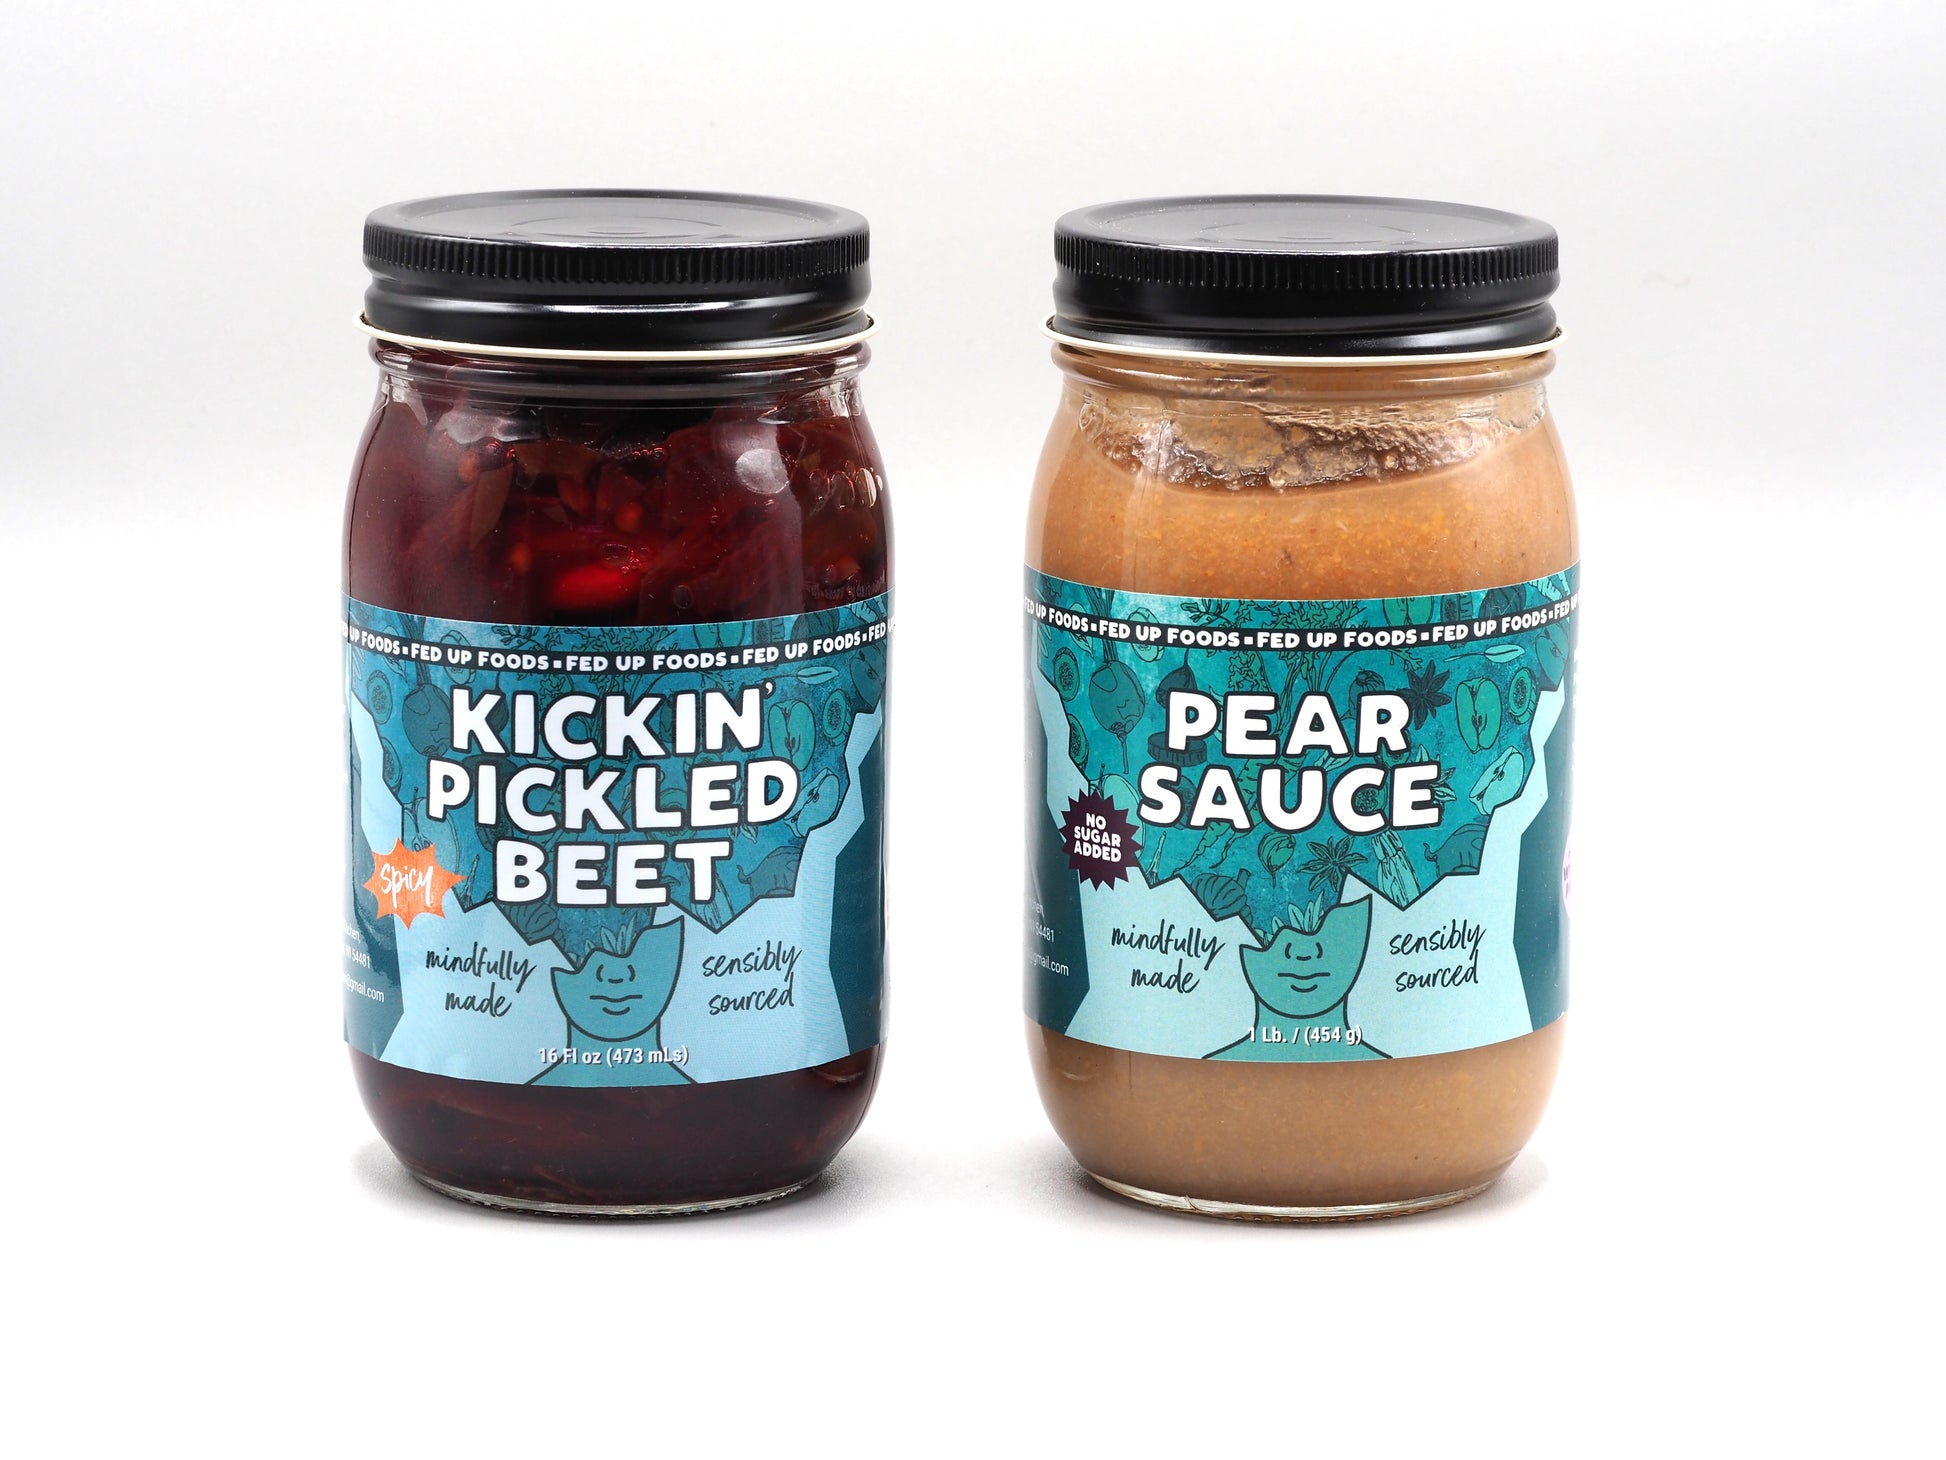 Fed Up Foods Kickin Pickled Beet and Pear Sauce in a 2 pack build your own variety pack 